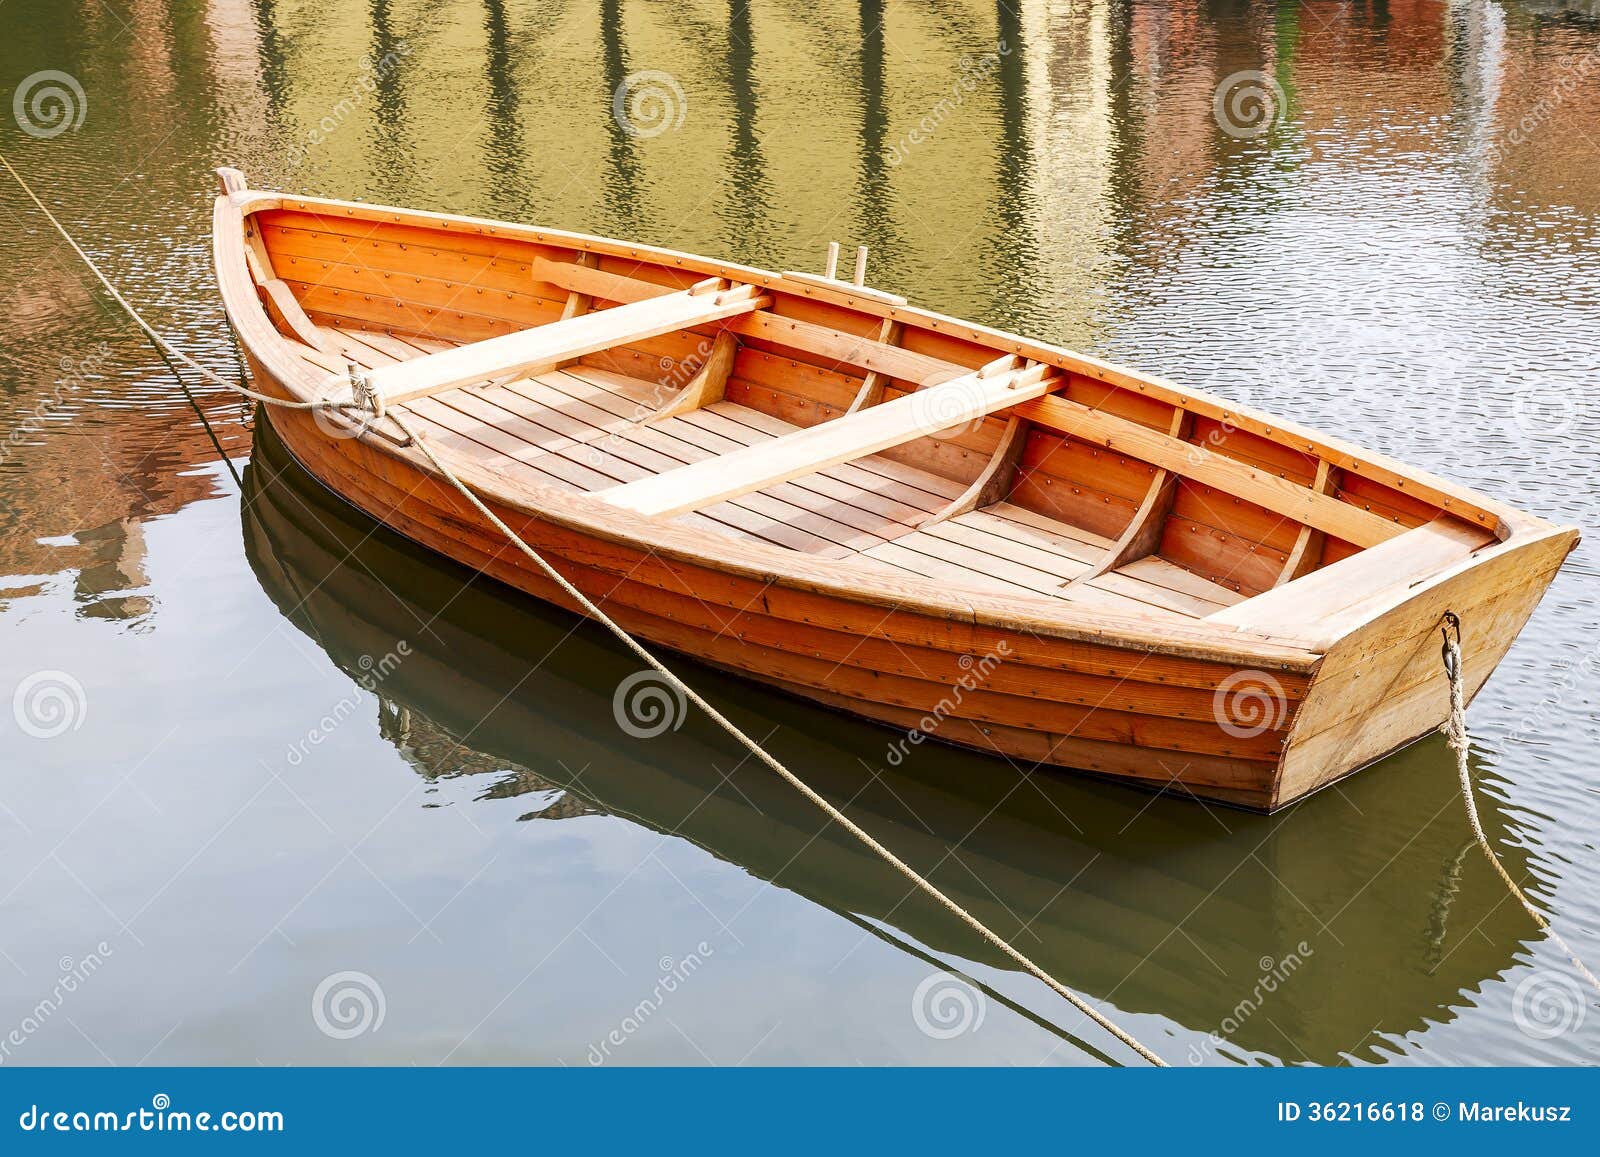 Wooden Boat Royalty Free Stock Photos - Image: 36216618